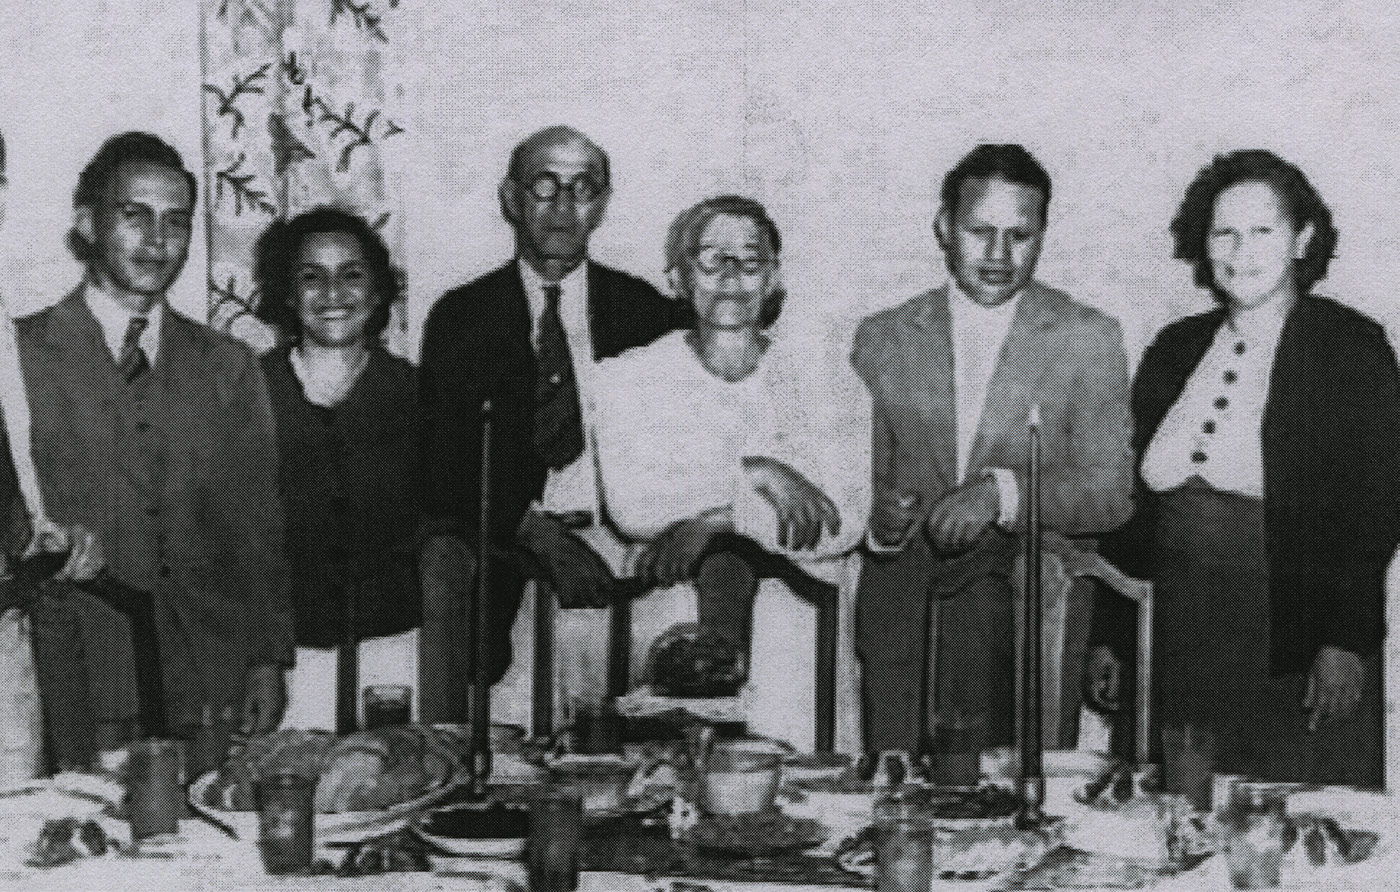 From left: Clinton and Mary Kanahele, Robert and Julia Plunkett, and Wallace and Hilda Forsythe. Combined, their administrative callings in the Hawaii Temple spanned more than fifty years. Courtesy of Wallace and Hilda Forsythe family.